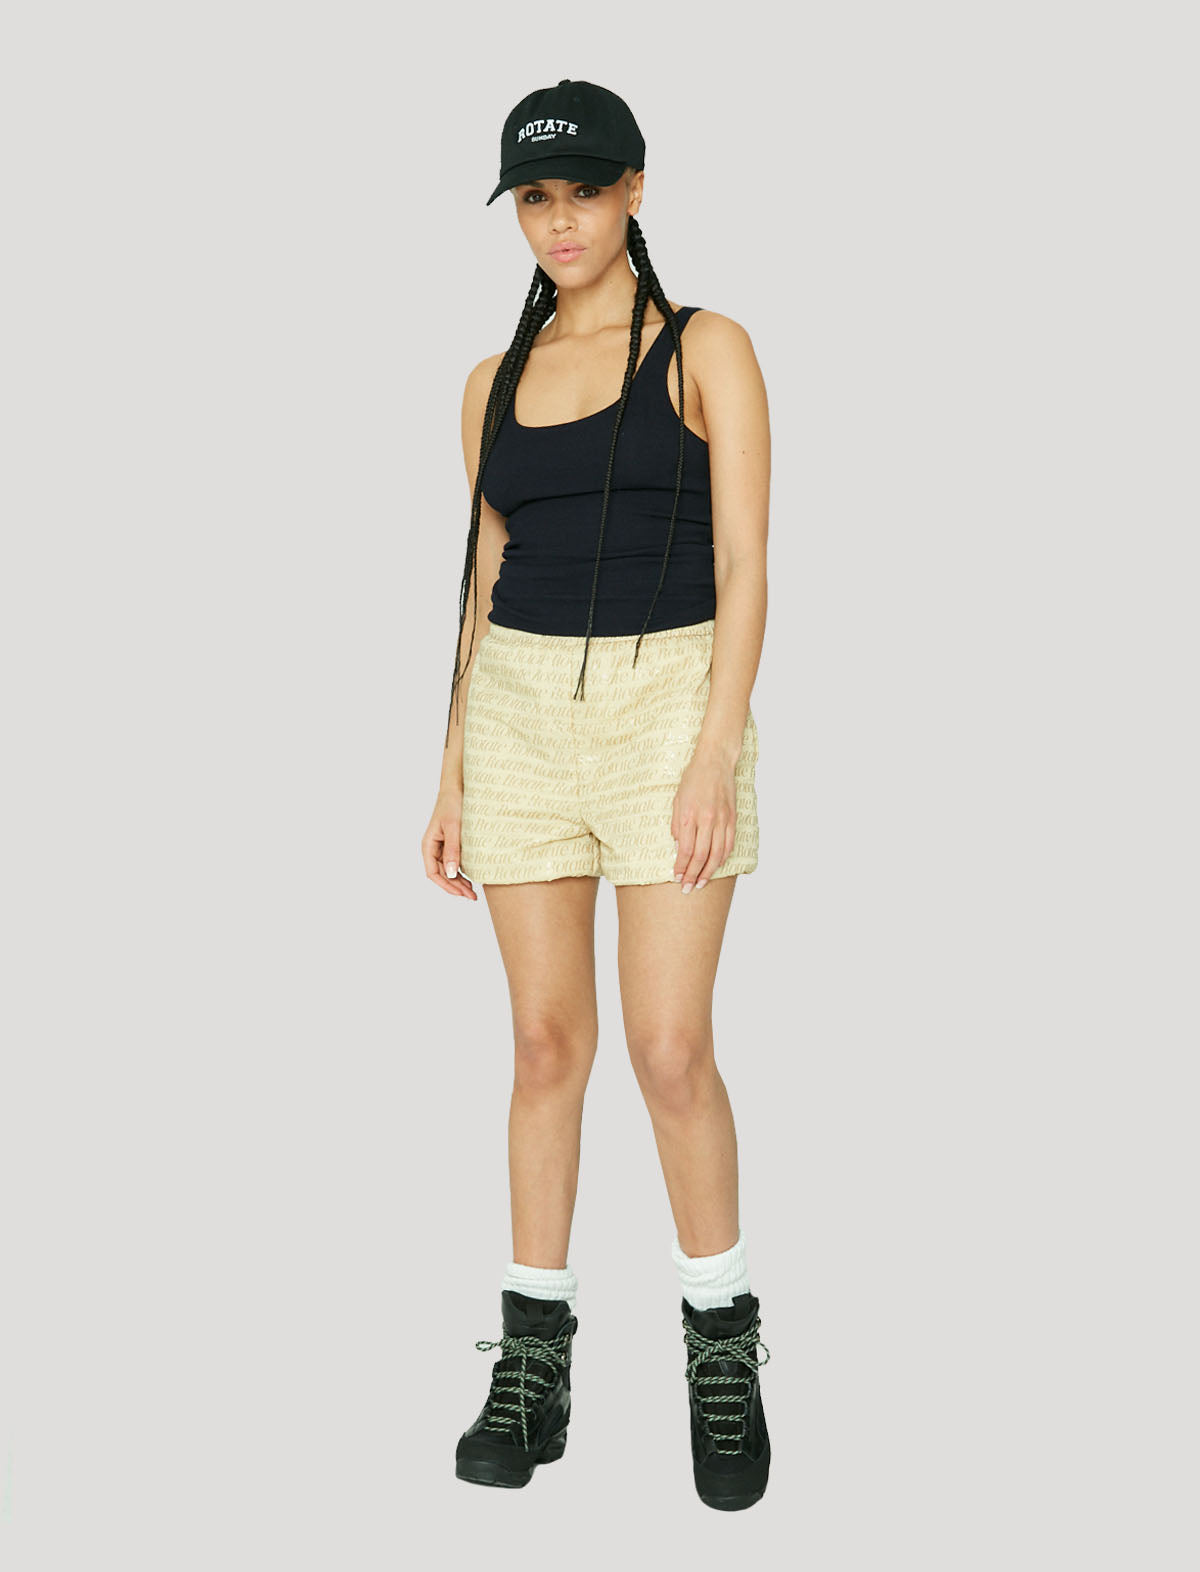 ROTATE Sunday 3 Kensa Shorts in Beige